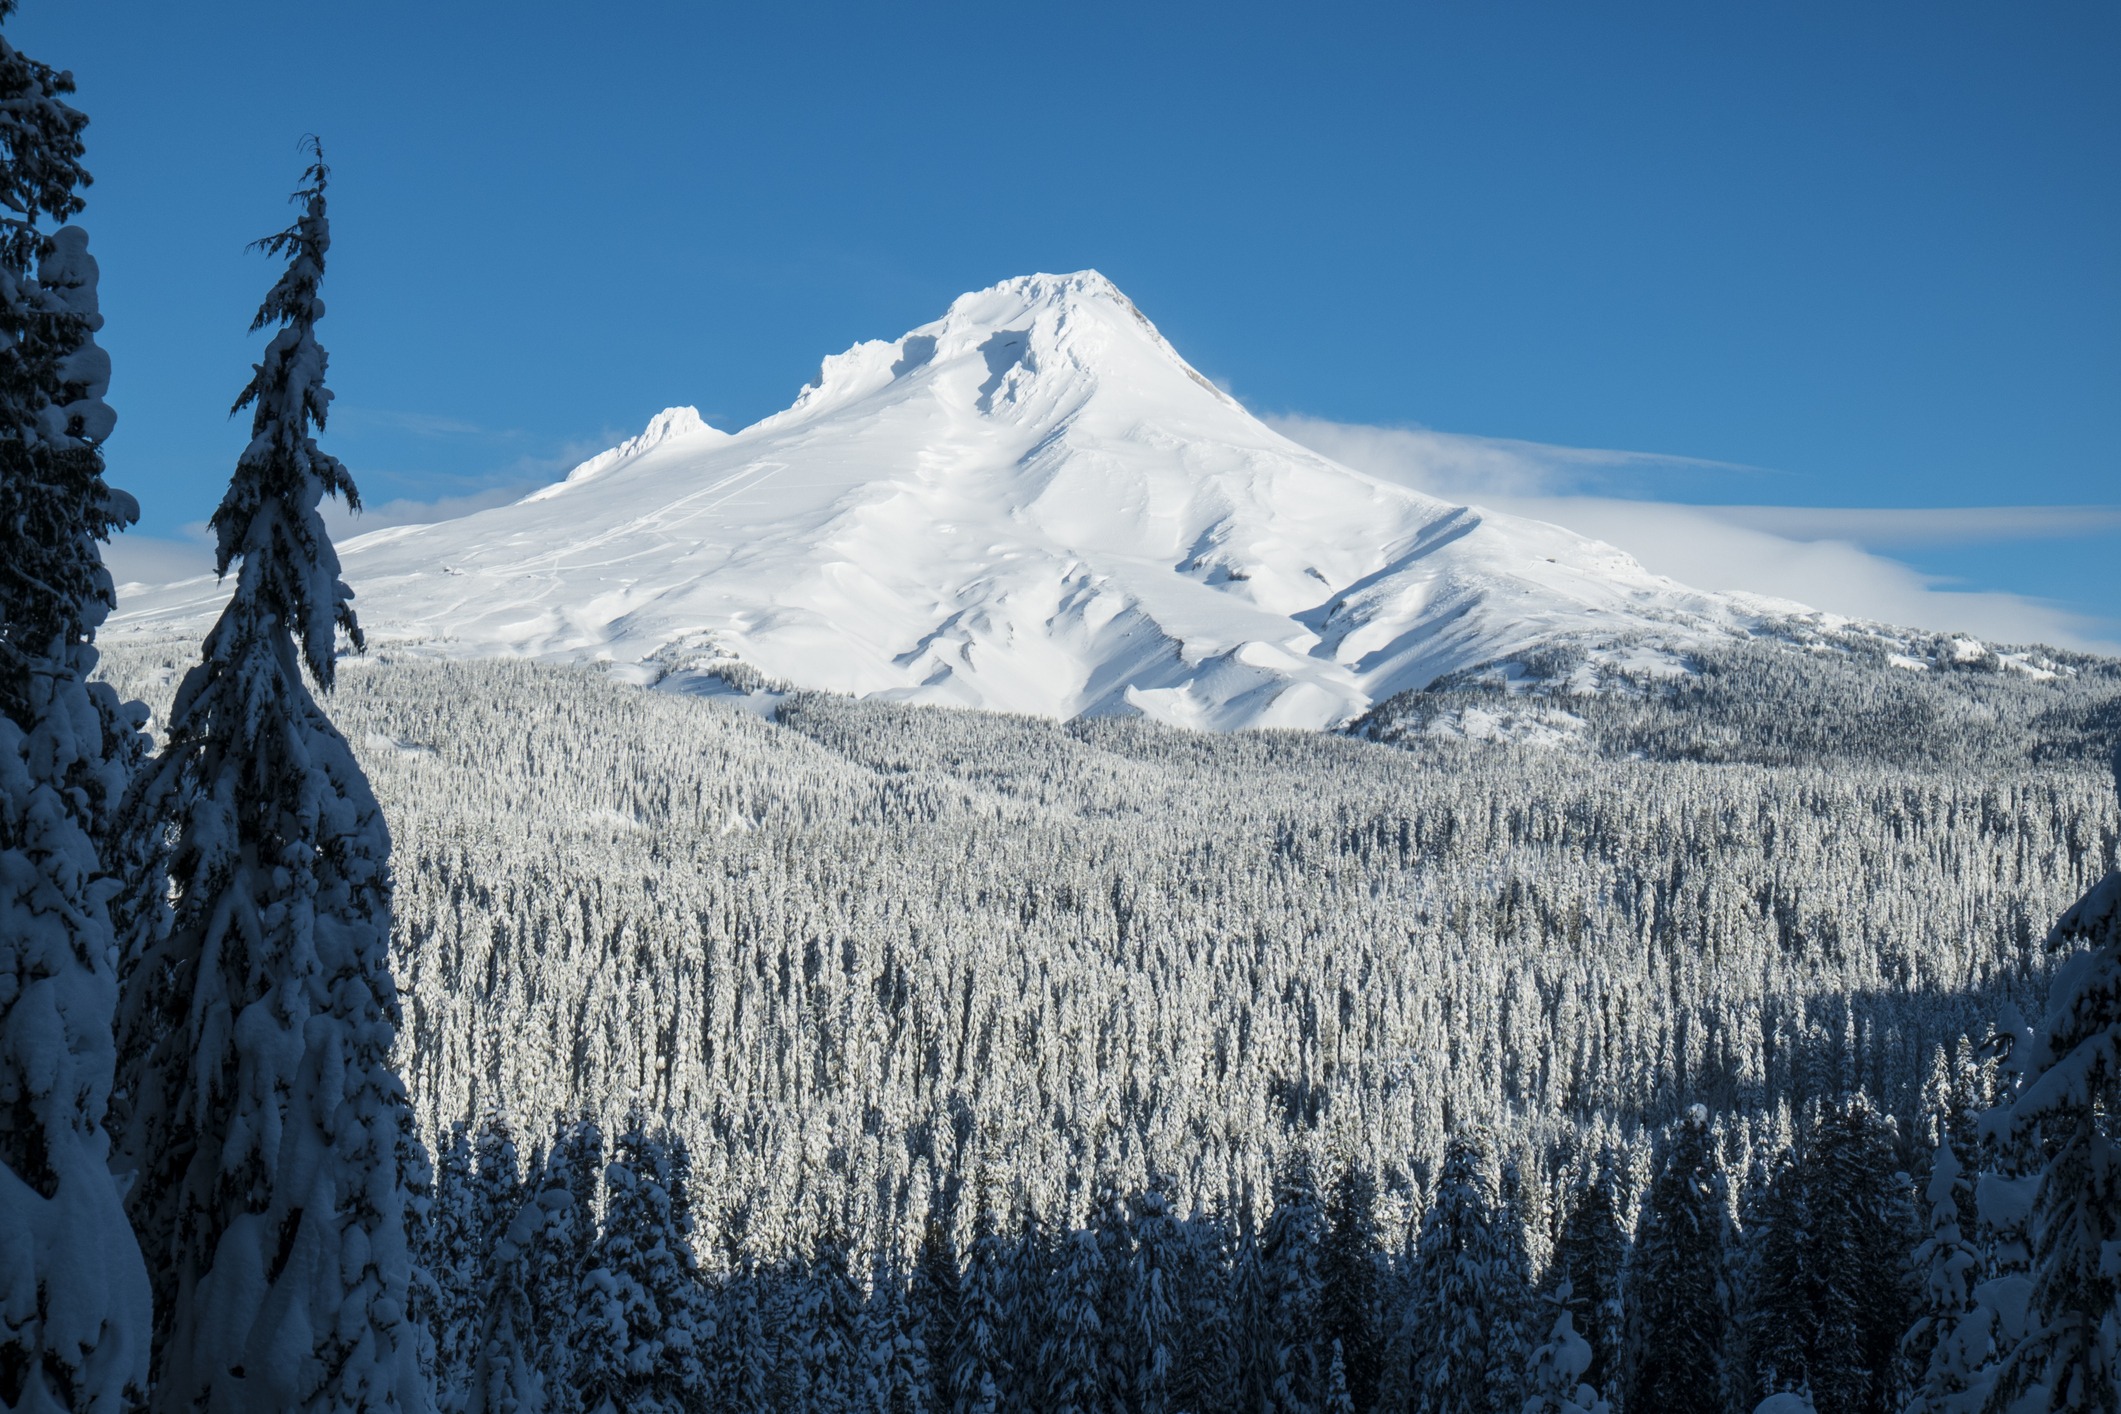 Mount Hood, Oregon covered in snow